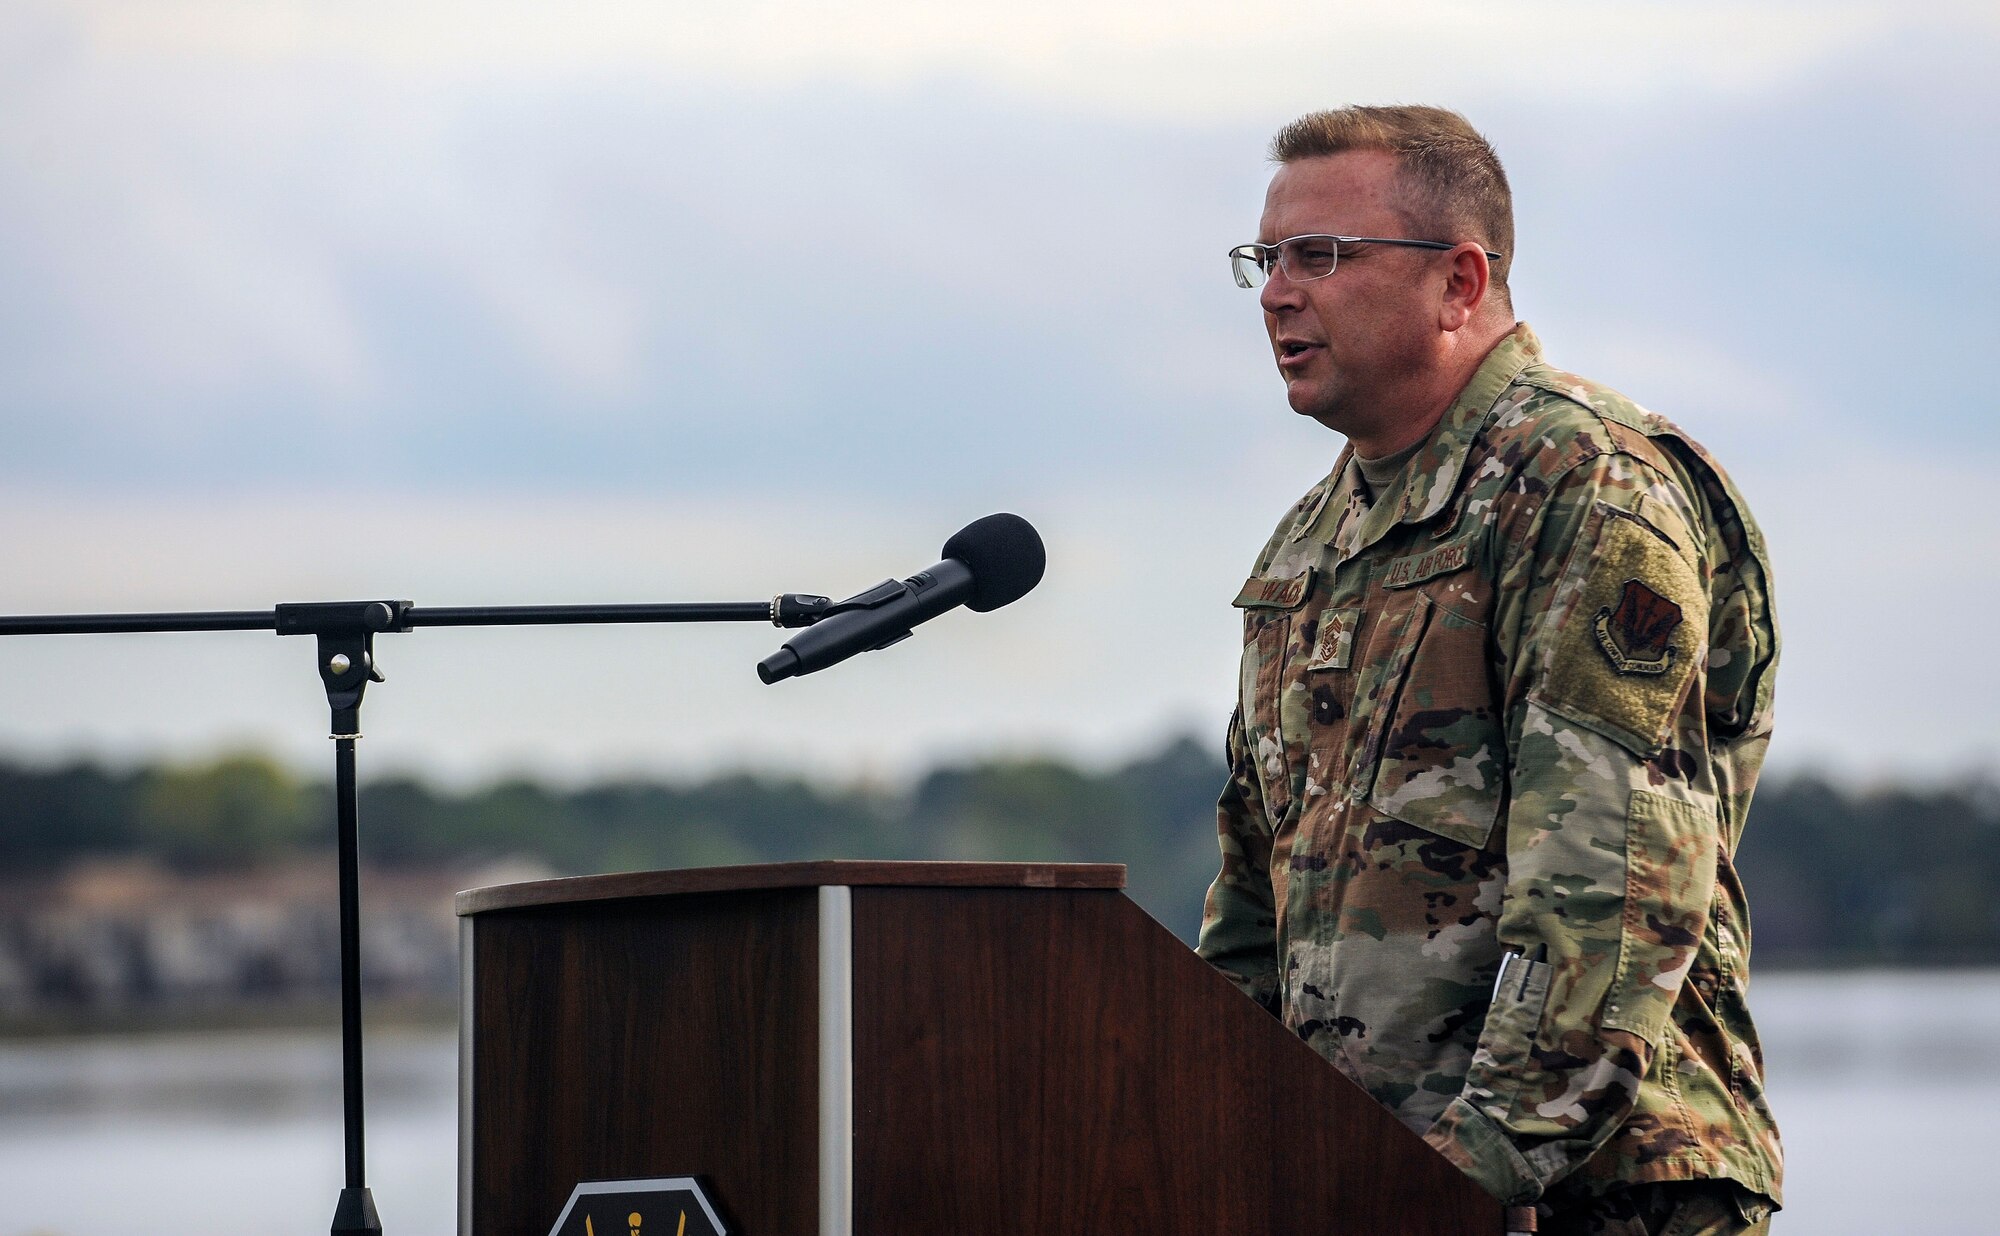 Chief Master Sgt. David Wade, command chief of ACC, gives a speech during an ACC quarterly award ceremony at Memorial Park on Joint Base Langley-Eustis, Virginia, Oct. 25, 2019. In addition to the ceremony, General Mike Holmes, commander of ACC, also led a resiliency walk during the day’s events. The walk gave staff members the opportunity to connect with their coworkers outside of the office. (U.S. Air Force photo by Tech. Sgt. Nick Wilson)